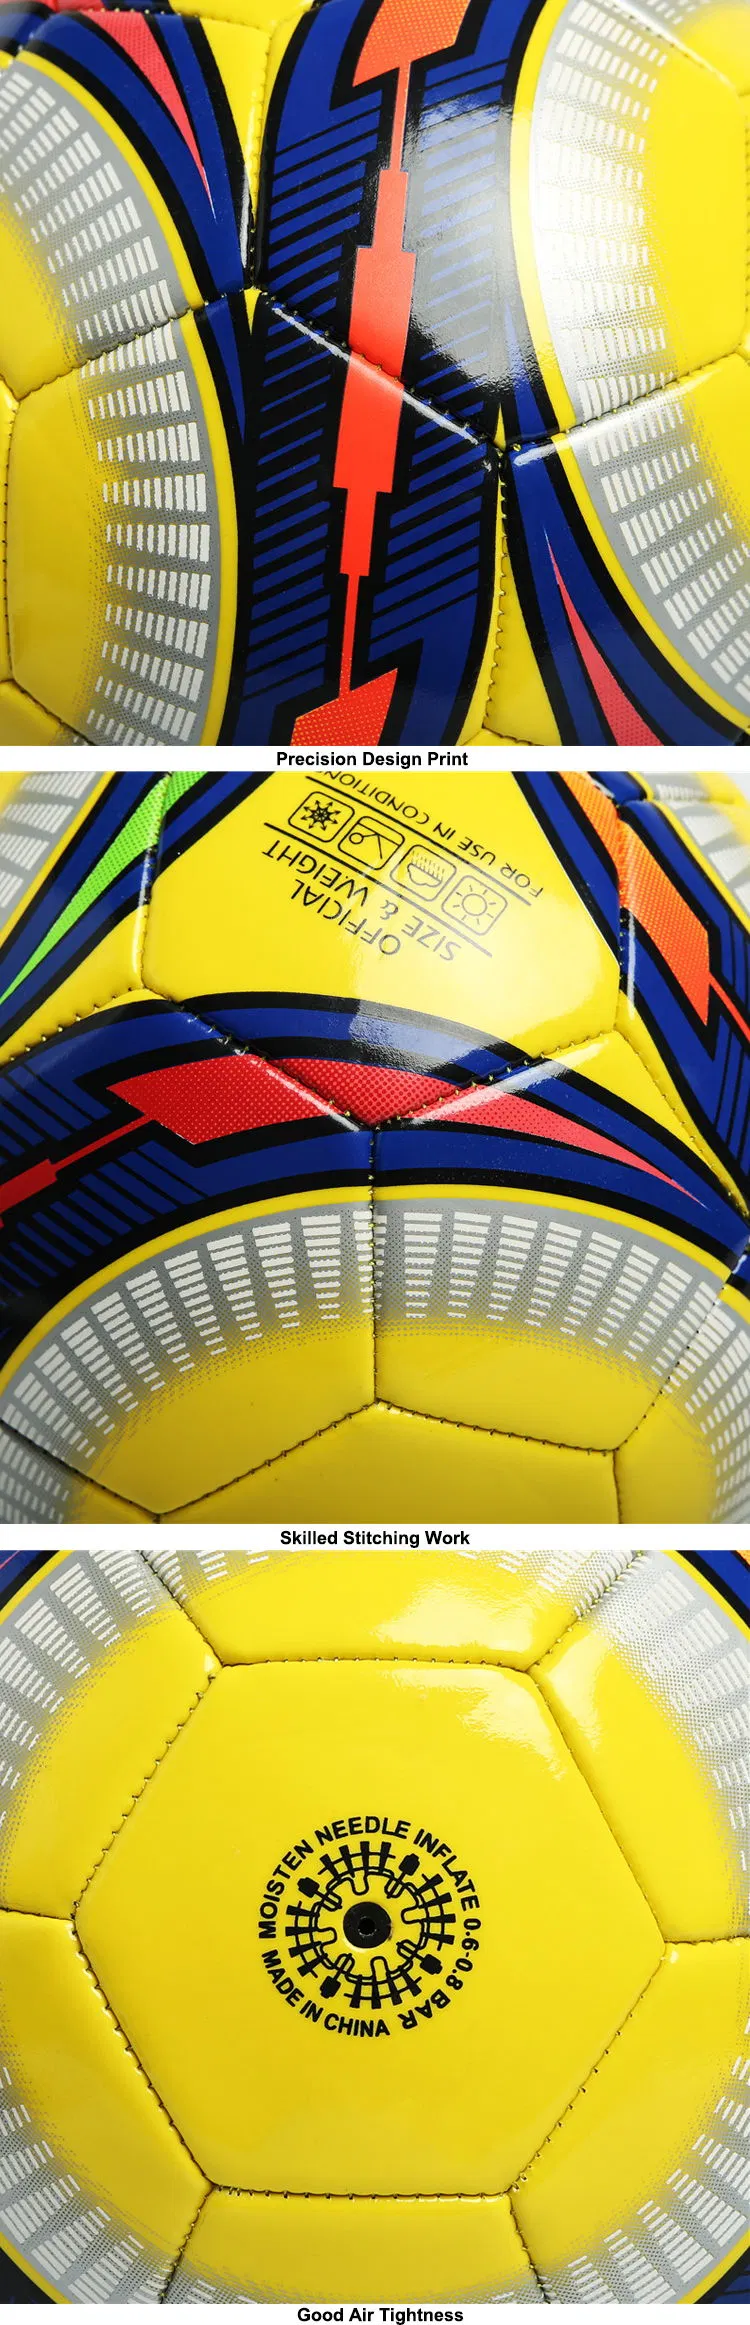 Original Size 5 4 3 Synthetic Leather Soccer Ball